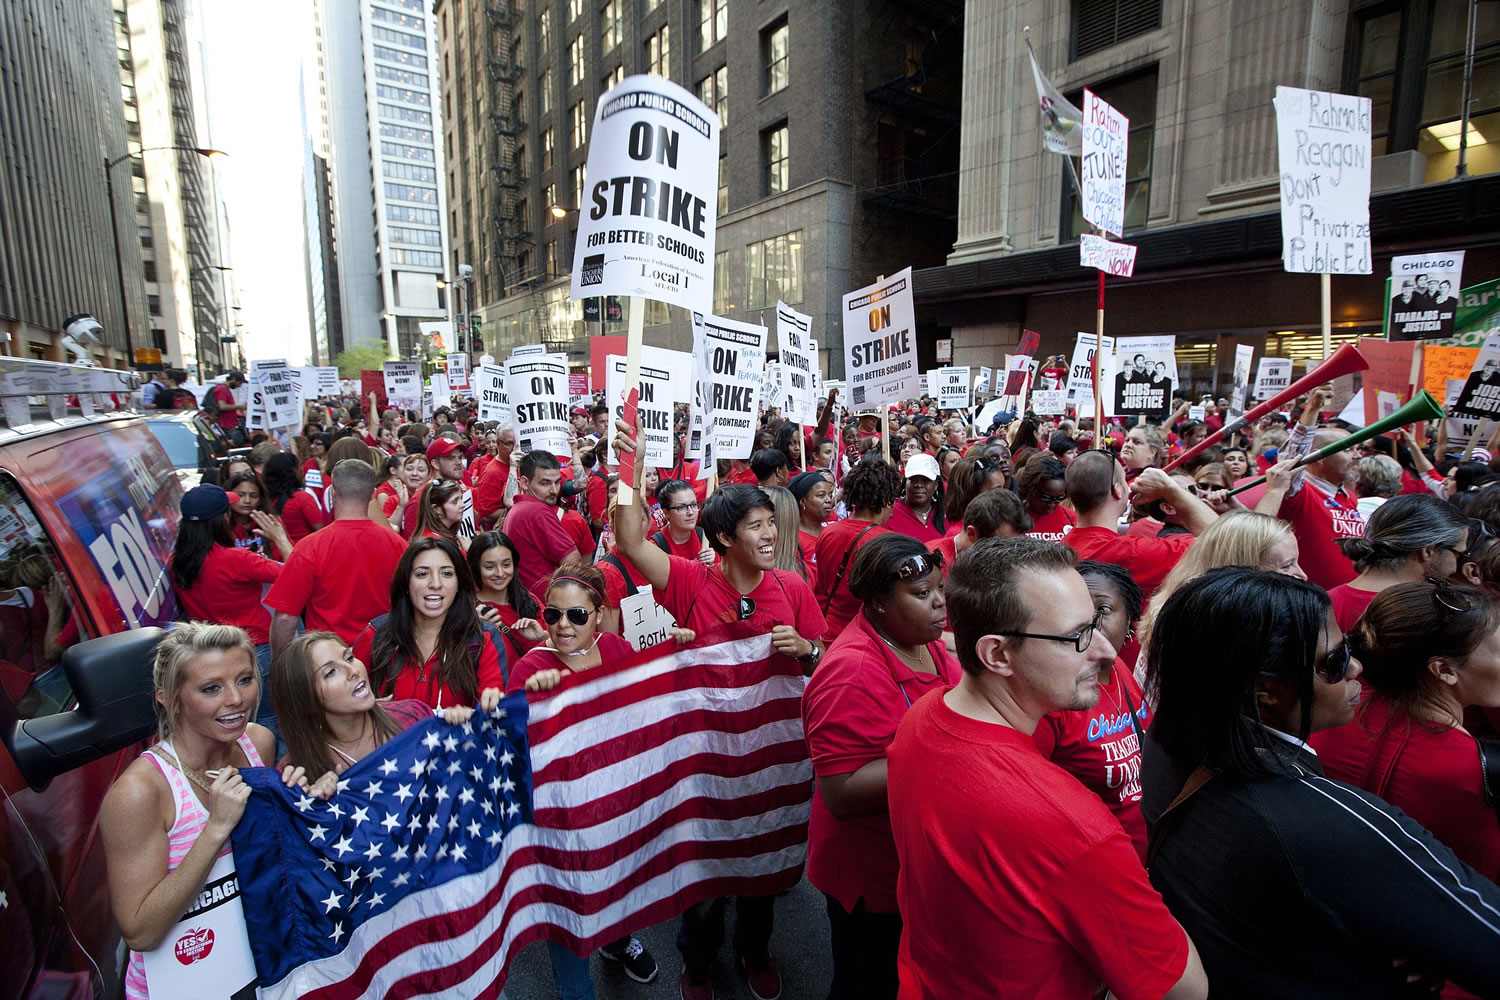 Thousands of public school teachers rallying outside the Chicago Public Schools district headquarters on the first day of strike action over teachersu2019 contracts in Chicago.